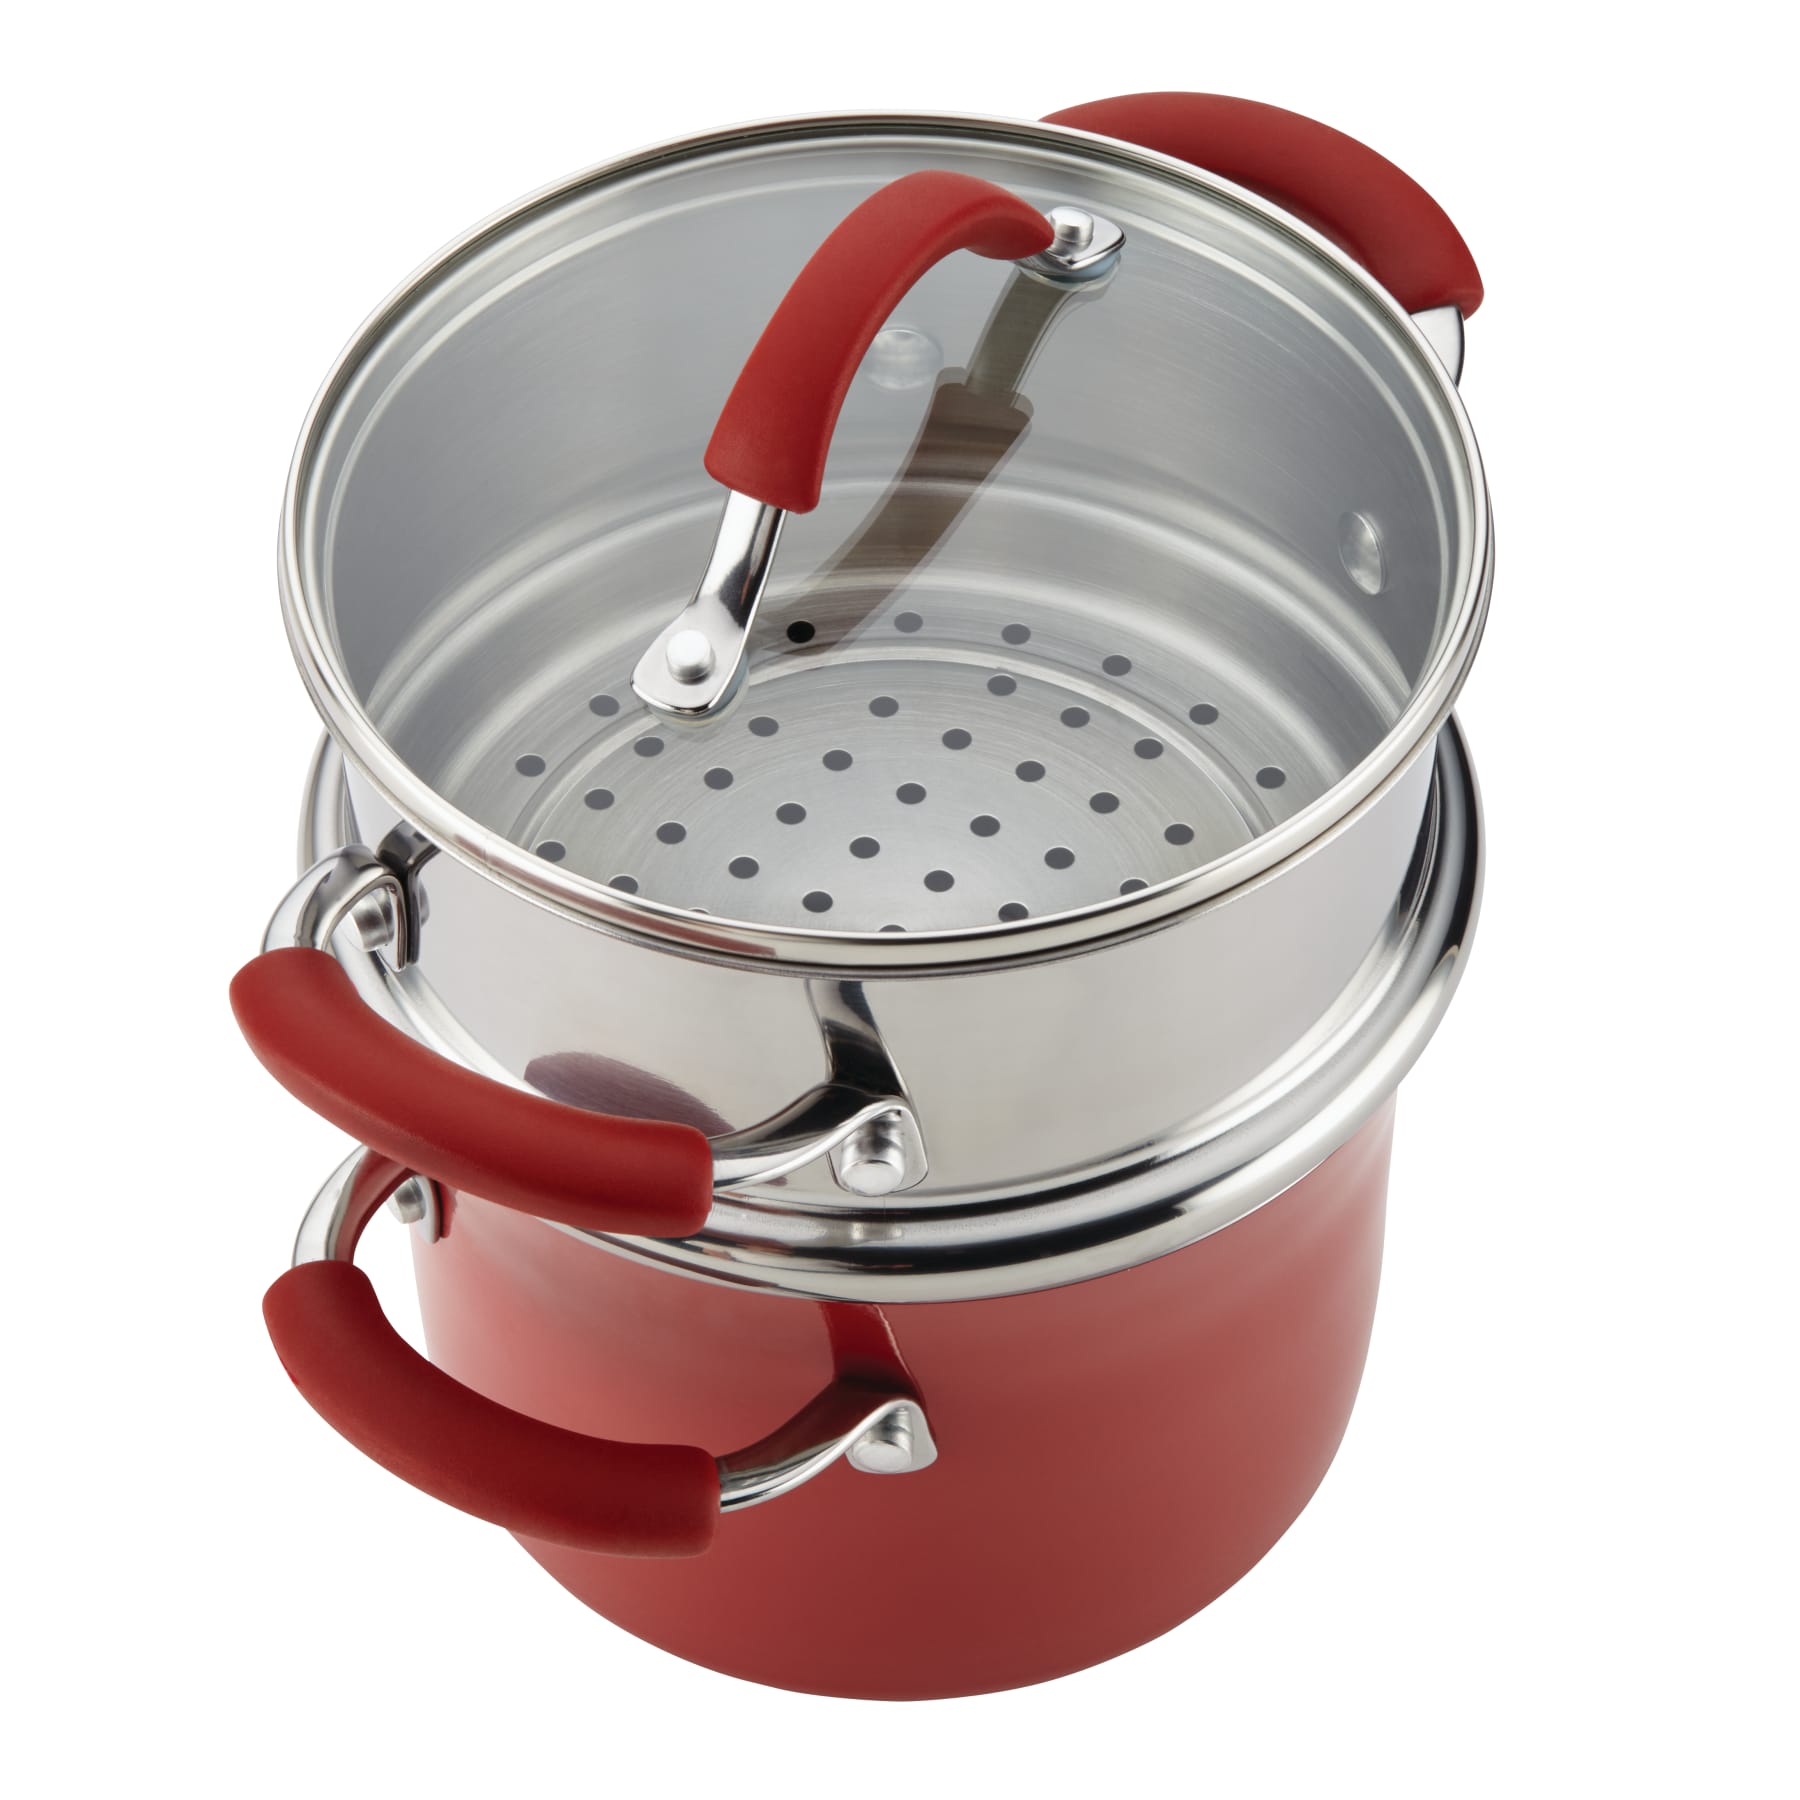 Cookware 3-Quart Covered Steamer Set | Cranberry Red